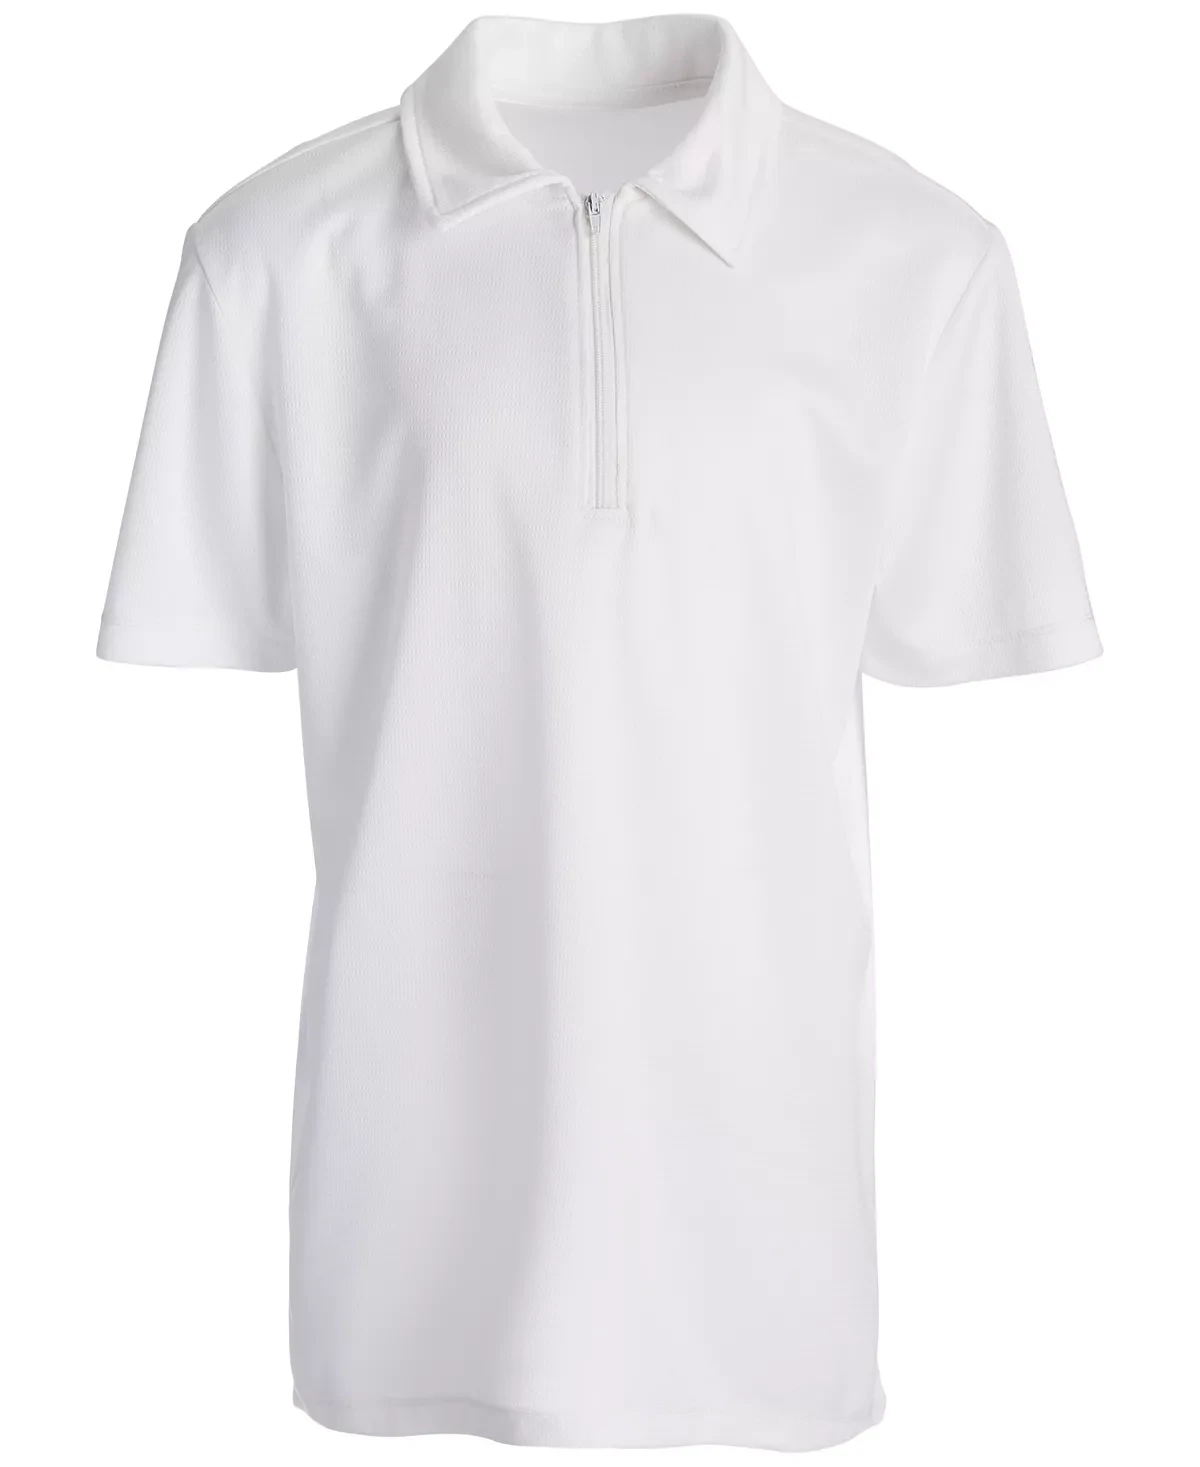 ID Ideology Big Boys Active Polo, Bright White - Size Small